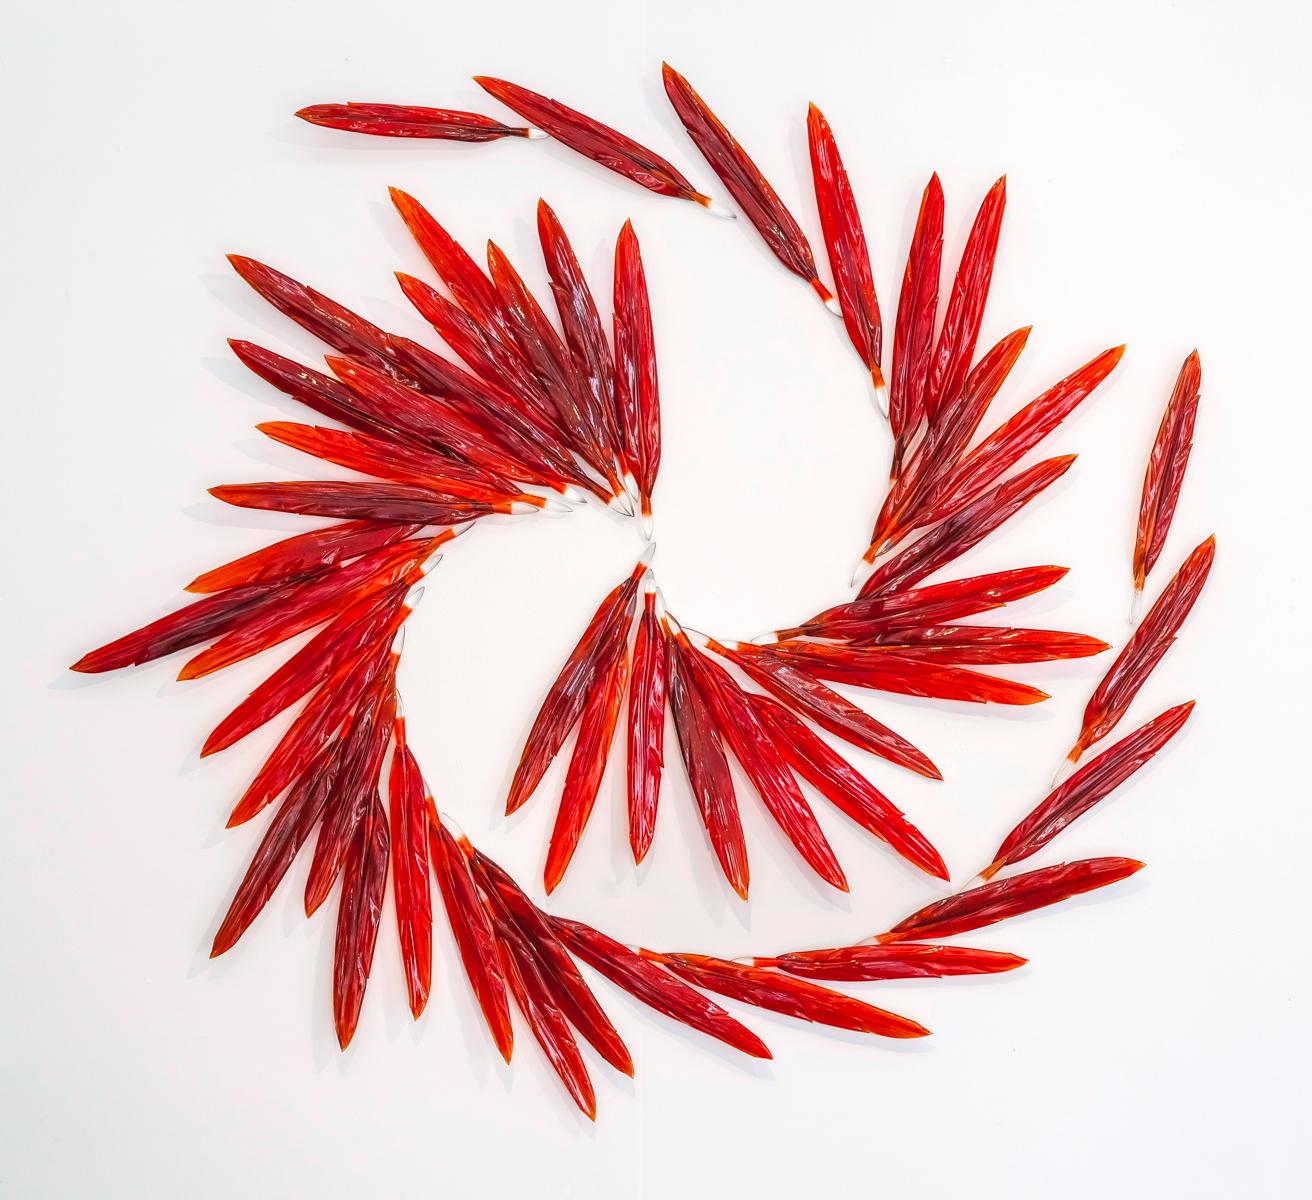 Flying With Fire - large, translucent, red, feathers, solid glass wall sculpture - Sculpture by John Paul Robinson